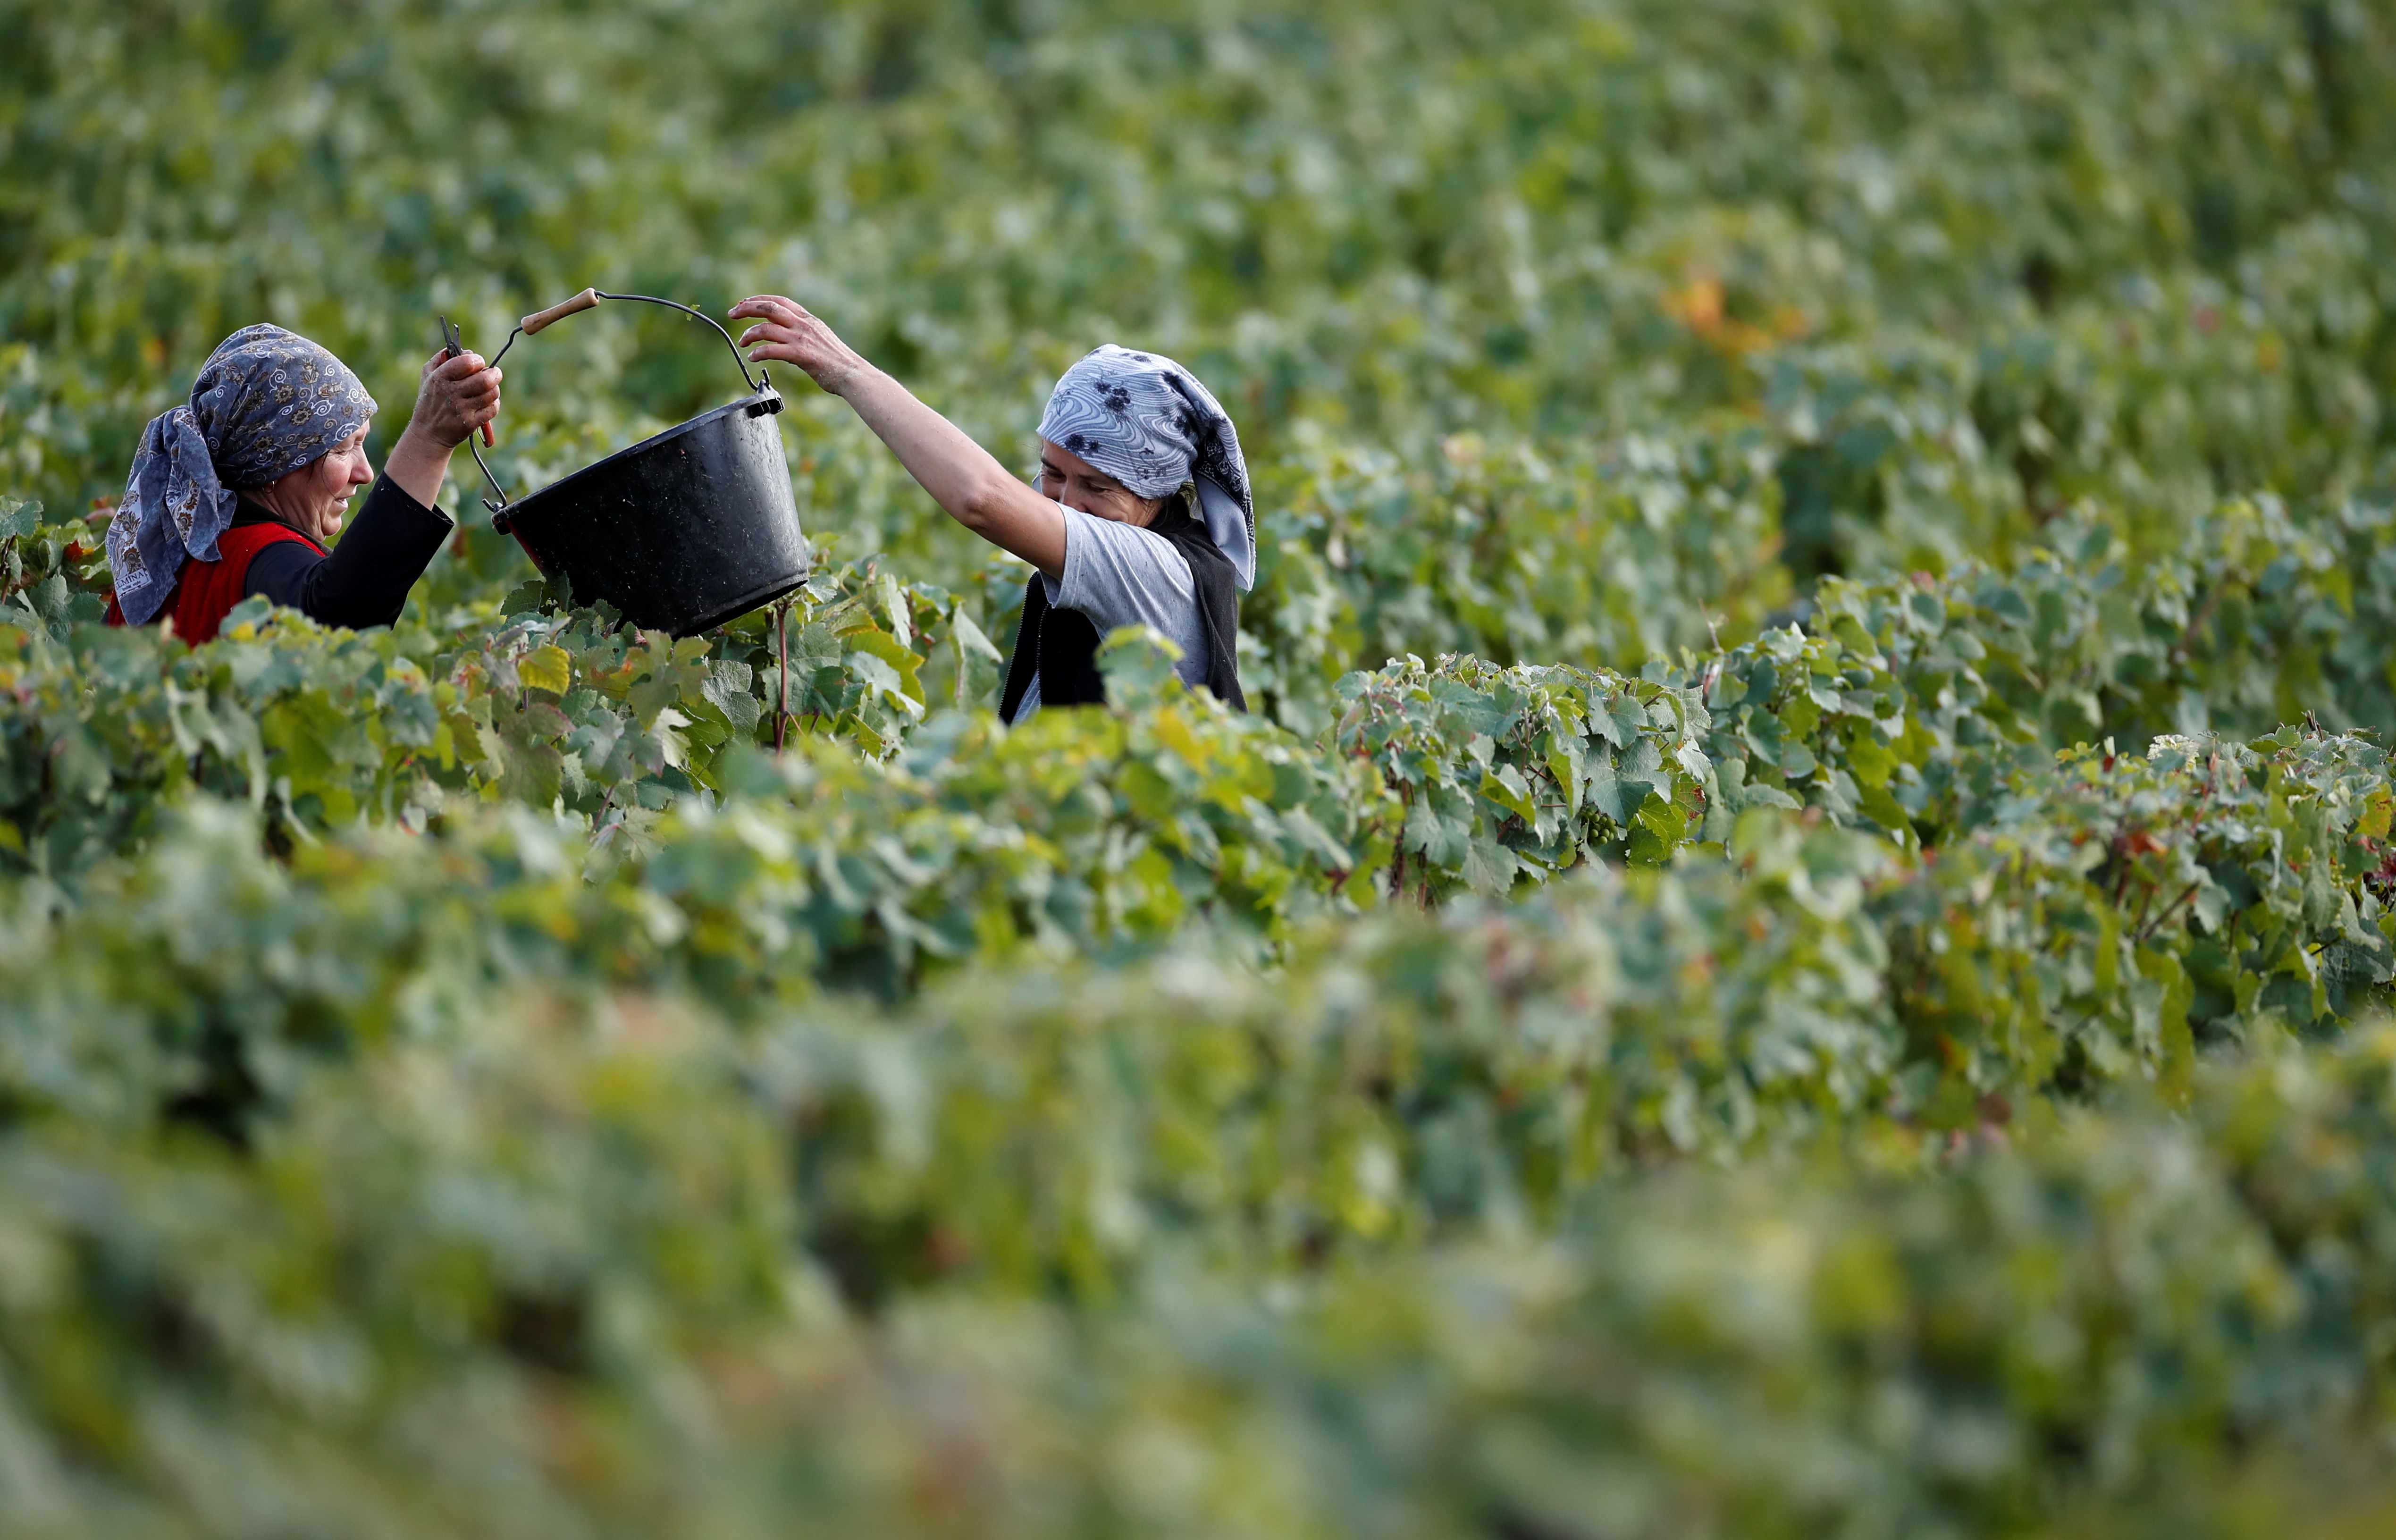 Workers collect grapes in a Taittinger vineyard during the traditional Champagne wine harvest in Pierry, near Epernay, France, September 10, 2019.   REUTERS/Christian Hartmann